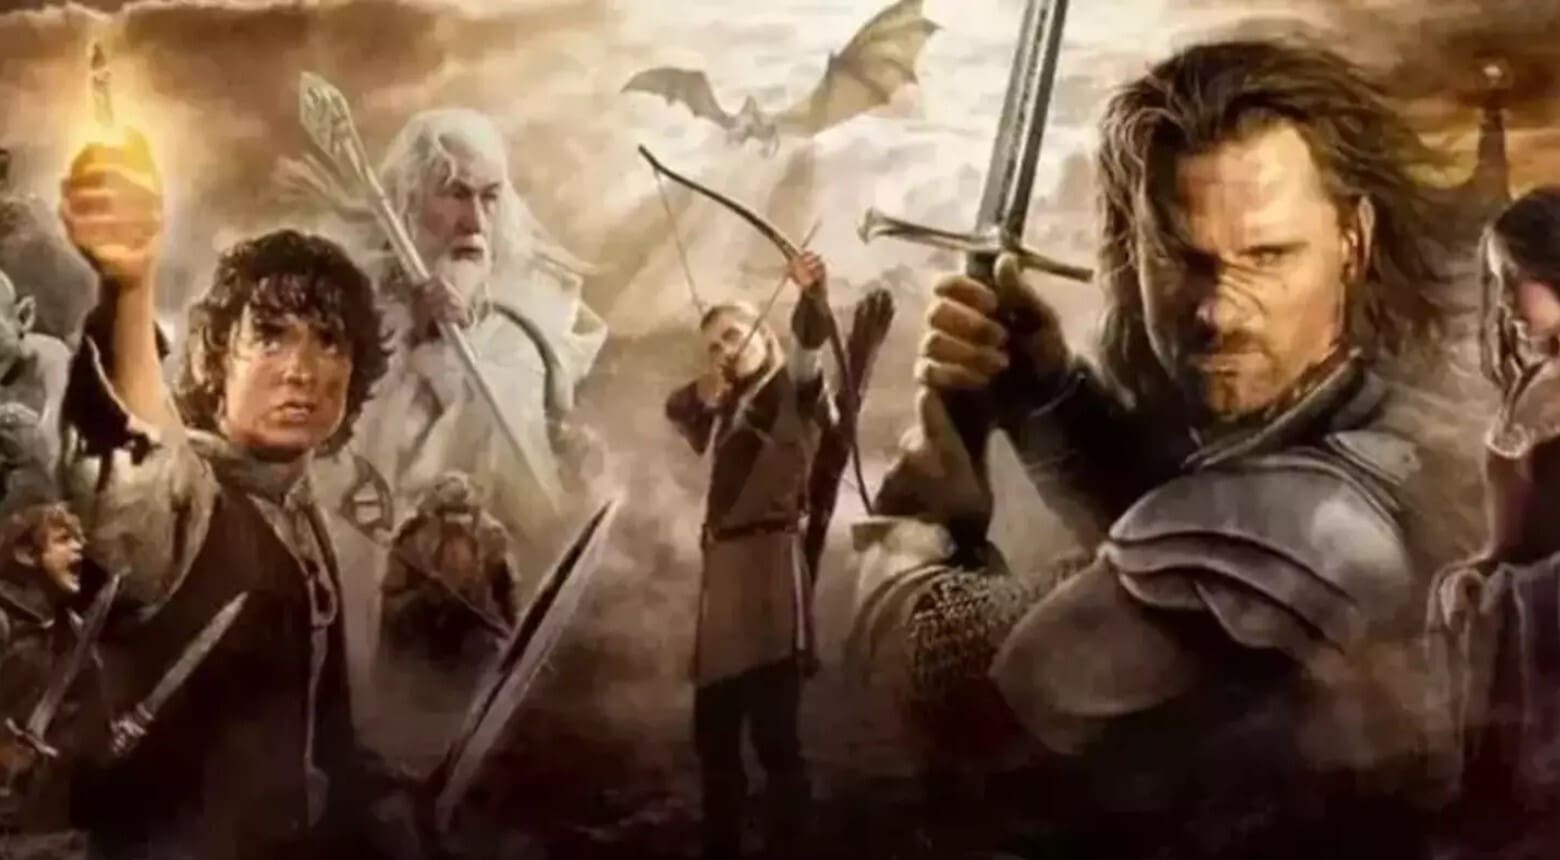 New Live-Action Lord of the Rings Movie in the Works, and Peter Jackson is at the Helm